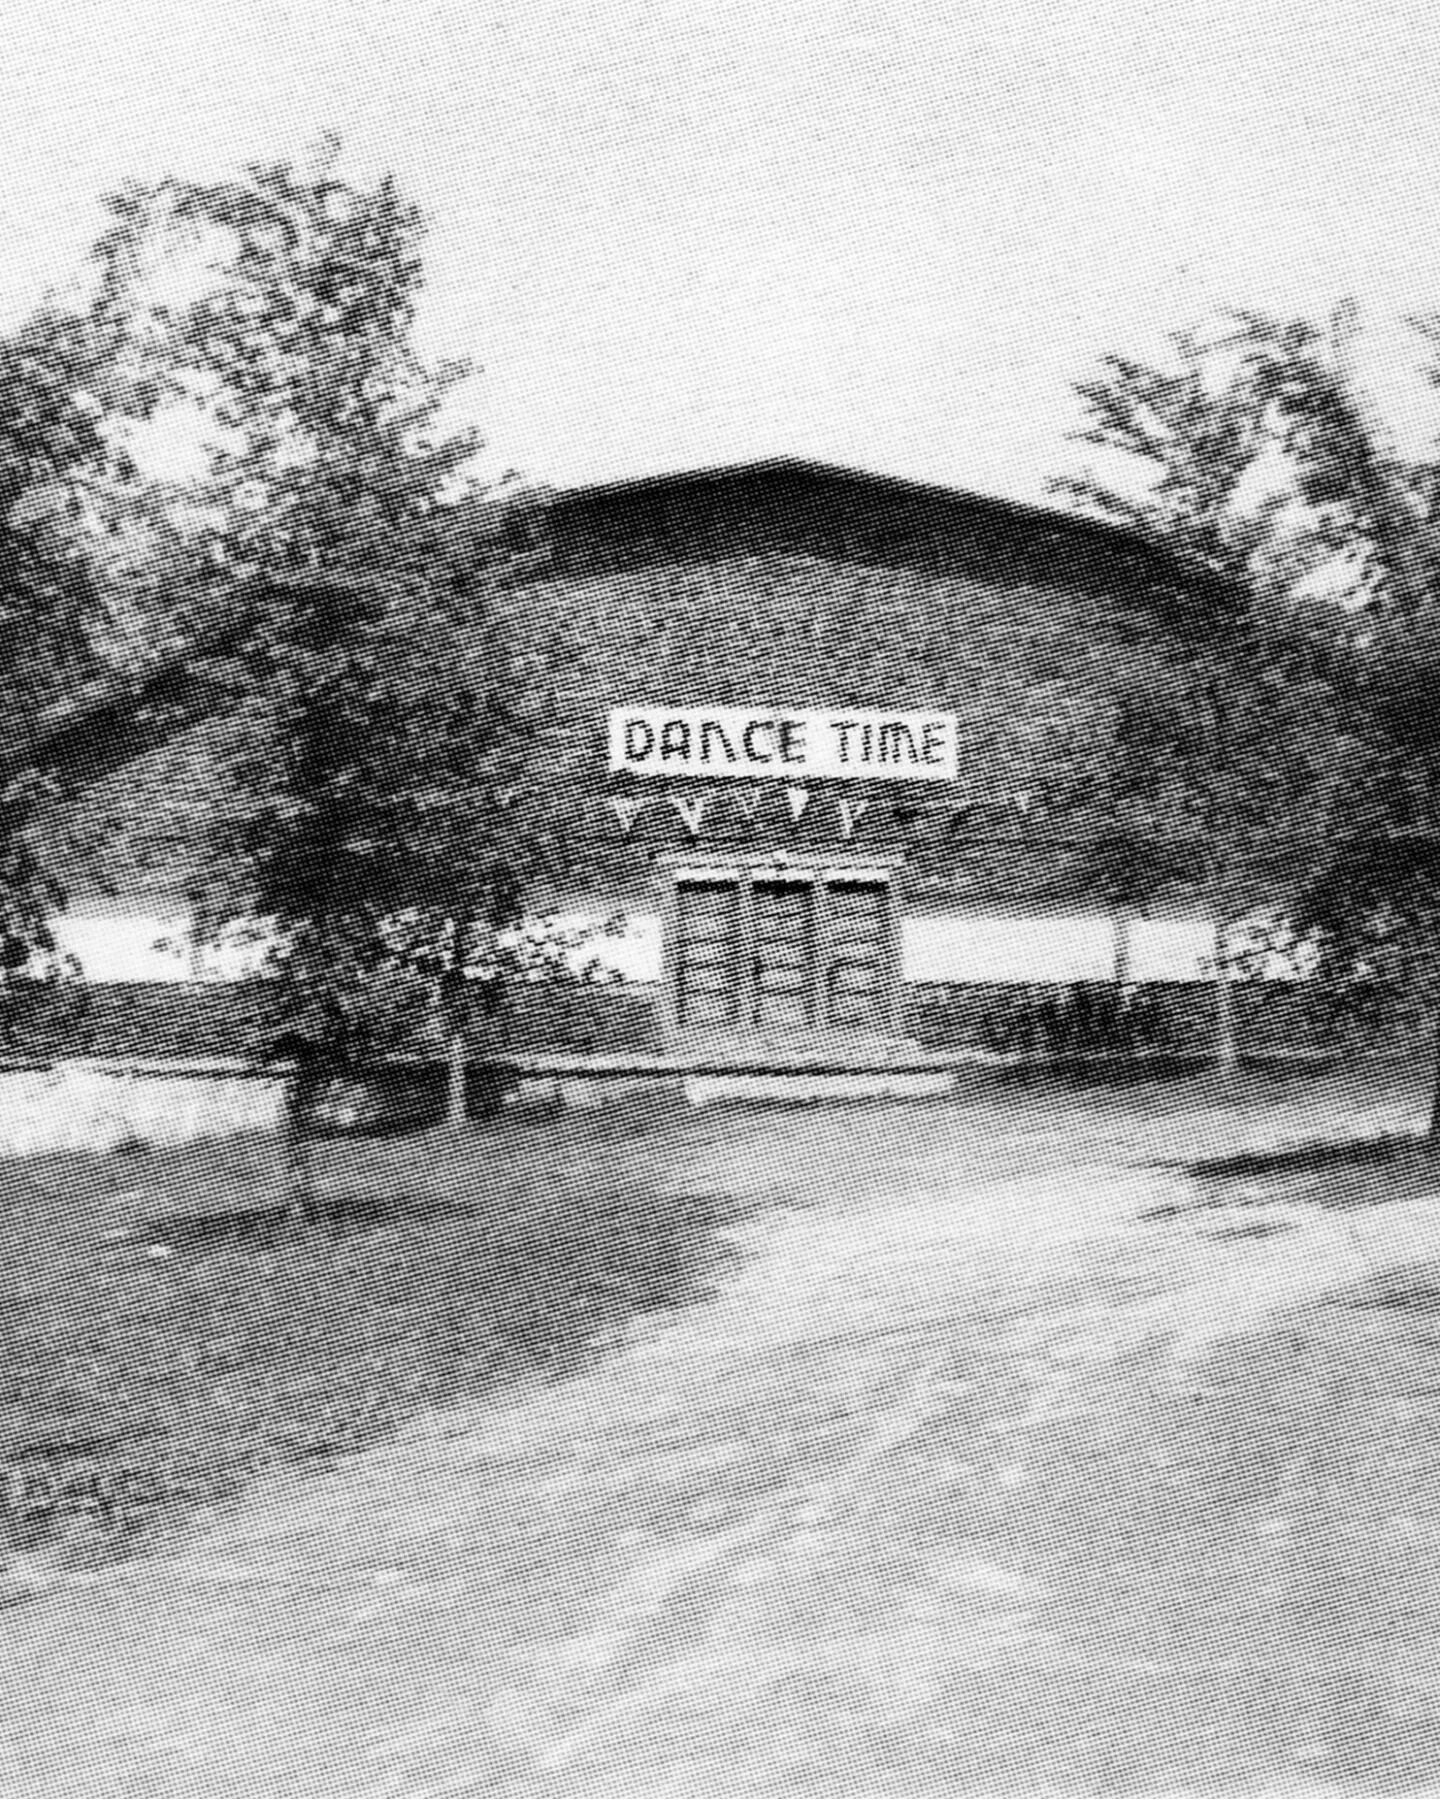 Erected in 1917 the Sylvester's Dance Pavillion was located on Route 136. The 150 ft x 55 ft building was the largest dance pavilion of its kind in the state. It provided entertainment for local and neighboring residents. There were large turnouts to